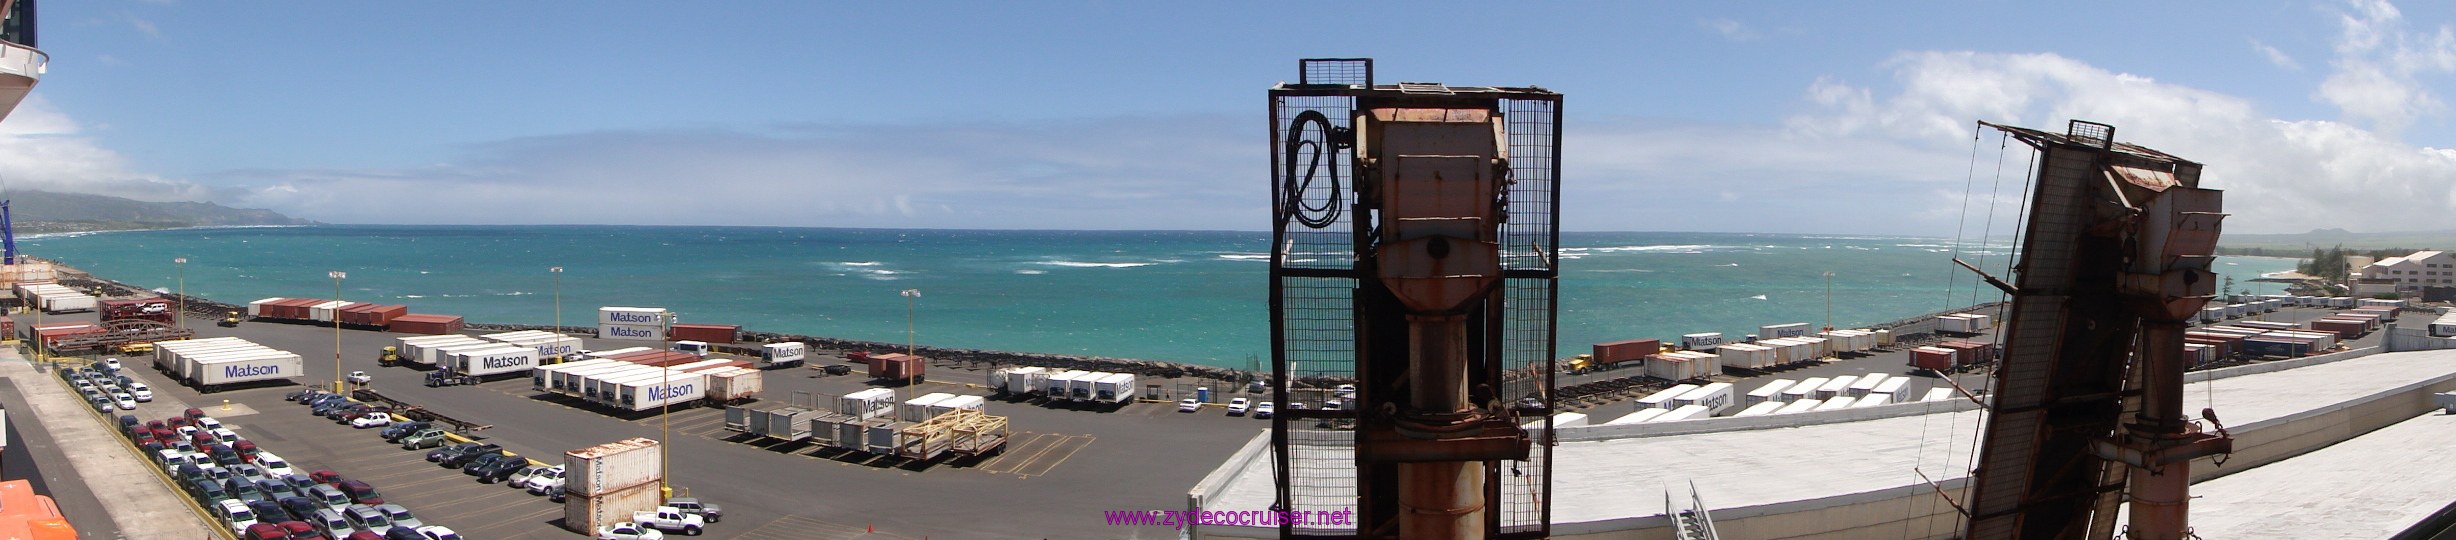 002: Carnival Spirit, Kahului, Maui, Lovely view from our balcony